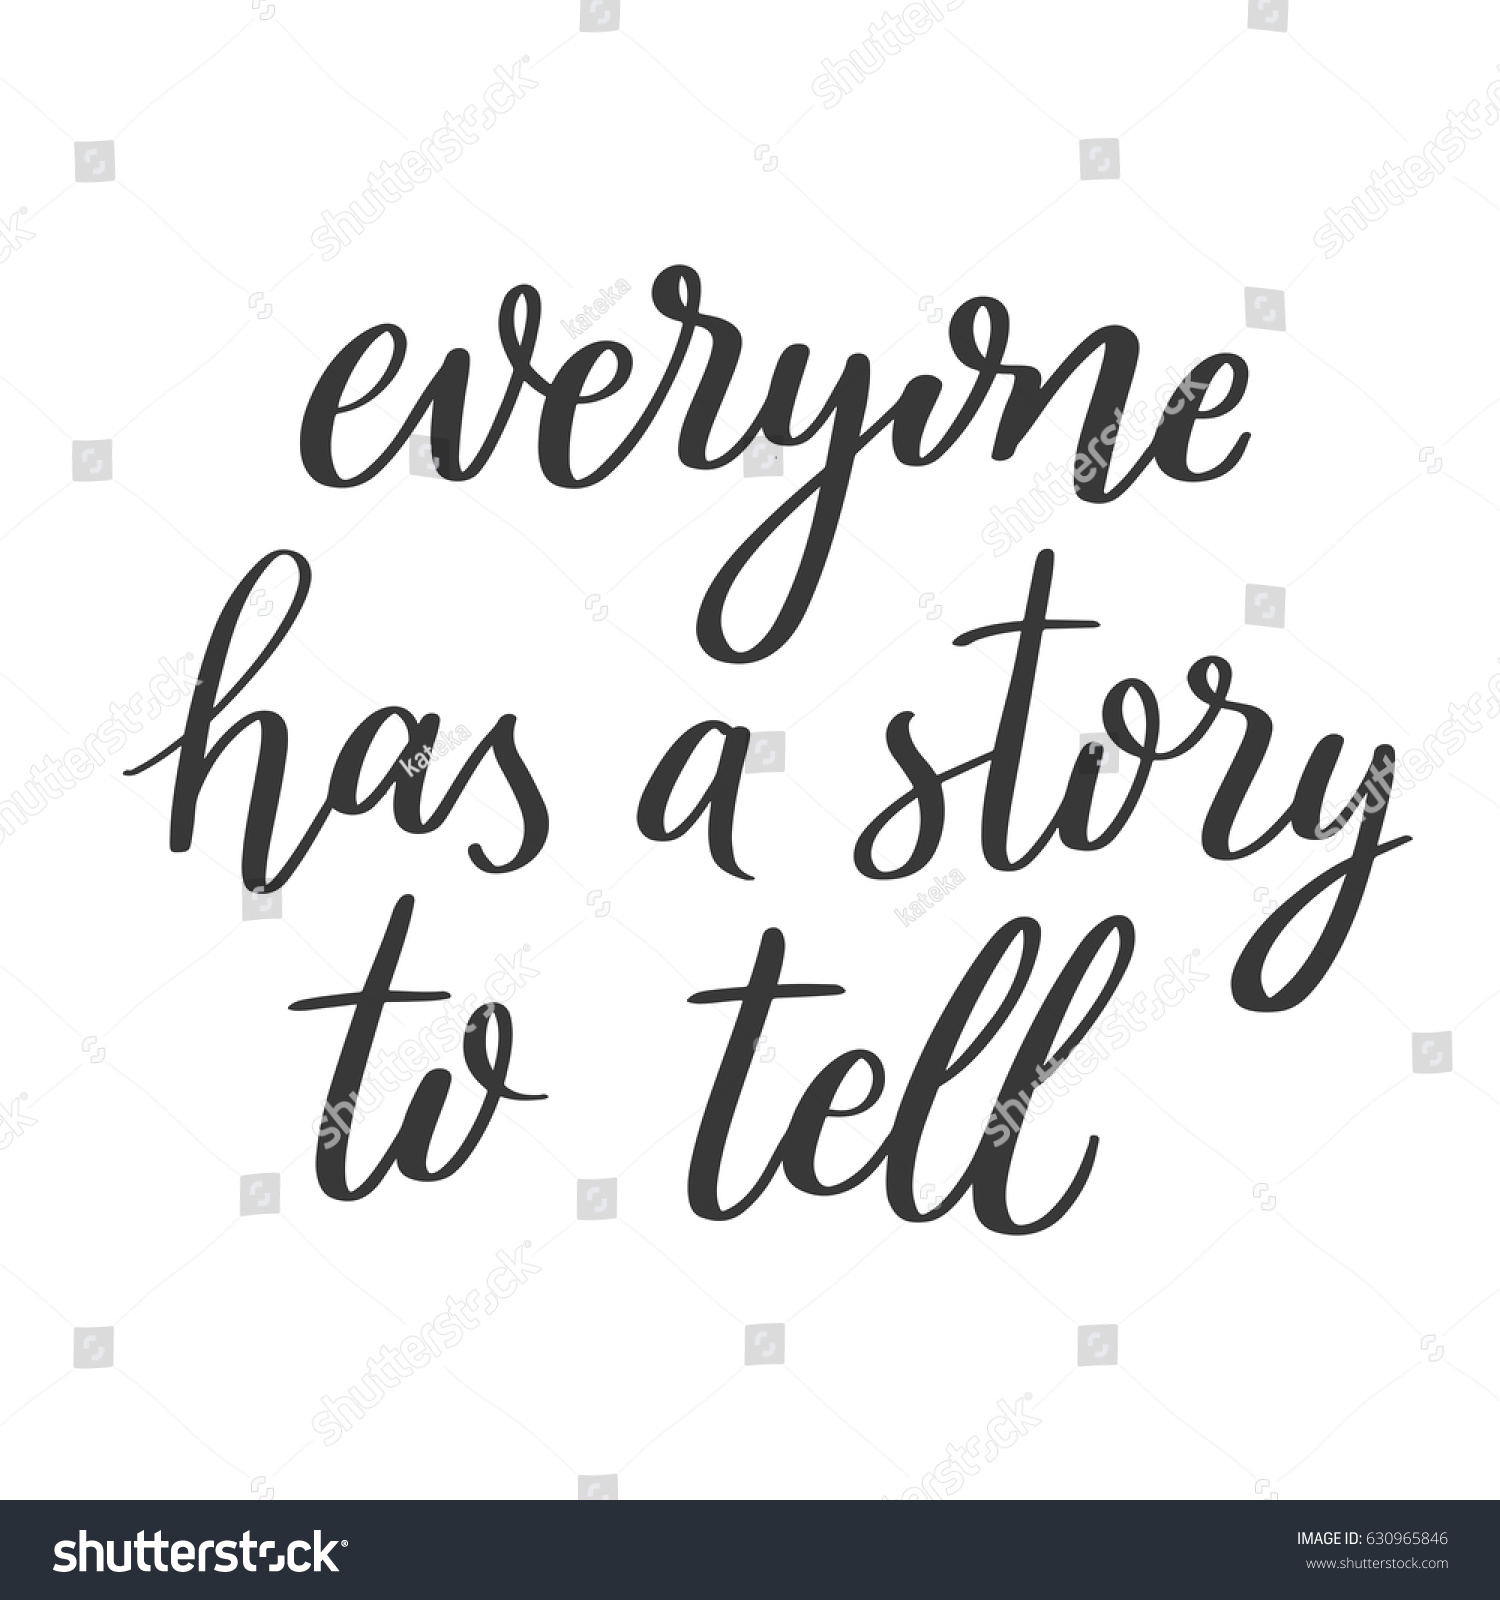 Everyone Has Story Tellinspiration Quotehand Drawn Stock Vector Royalty Free